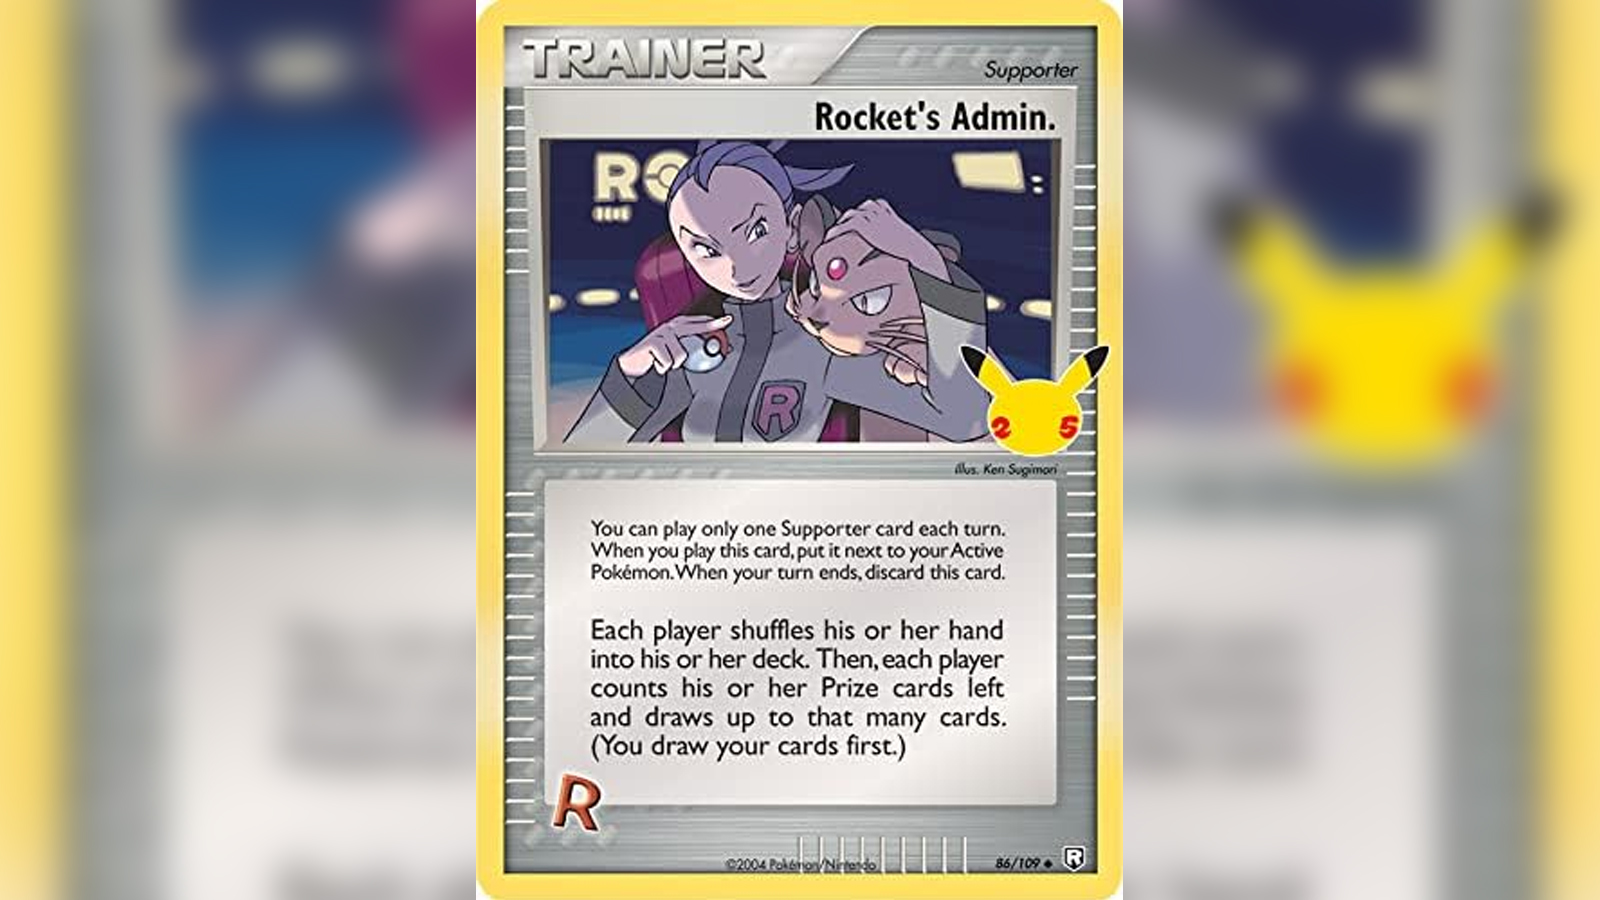 Pokemon cards for free? Almost, but they're all under $2